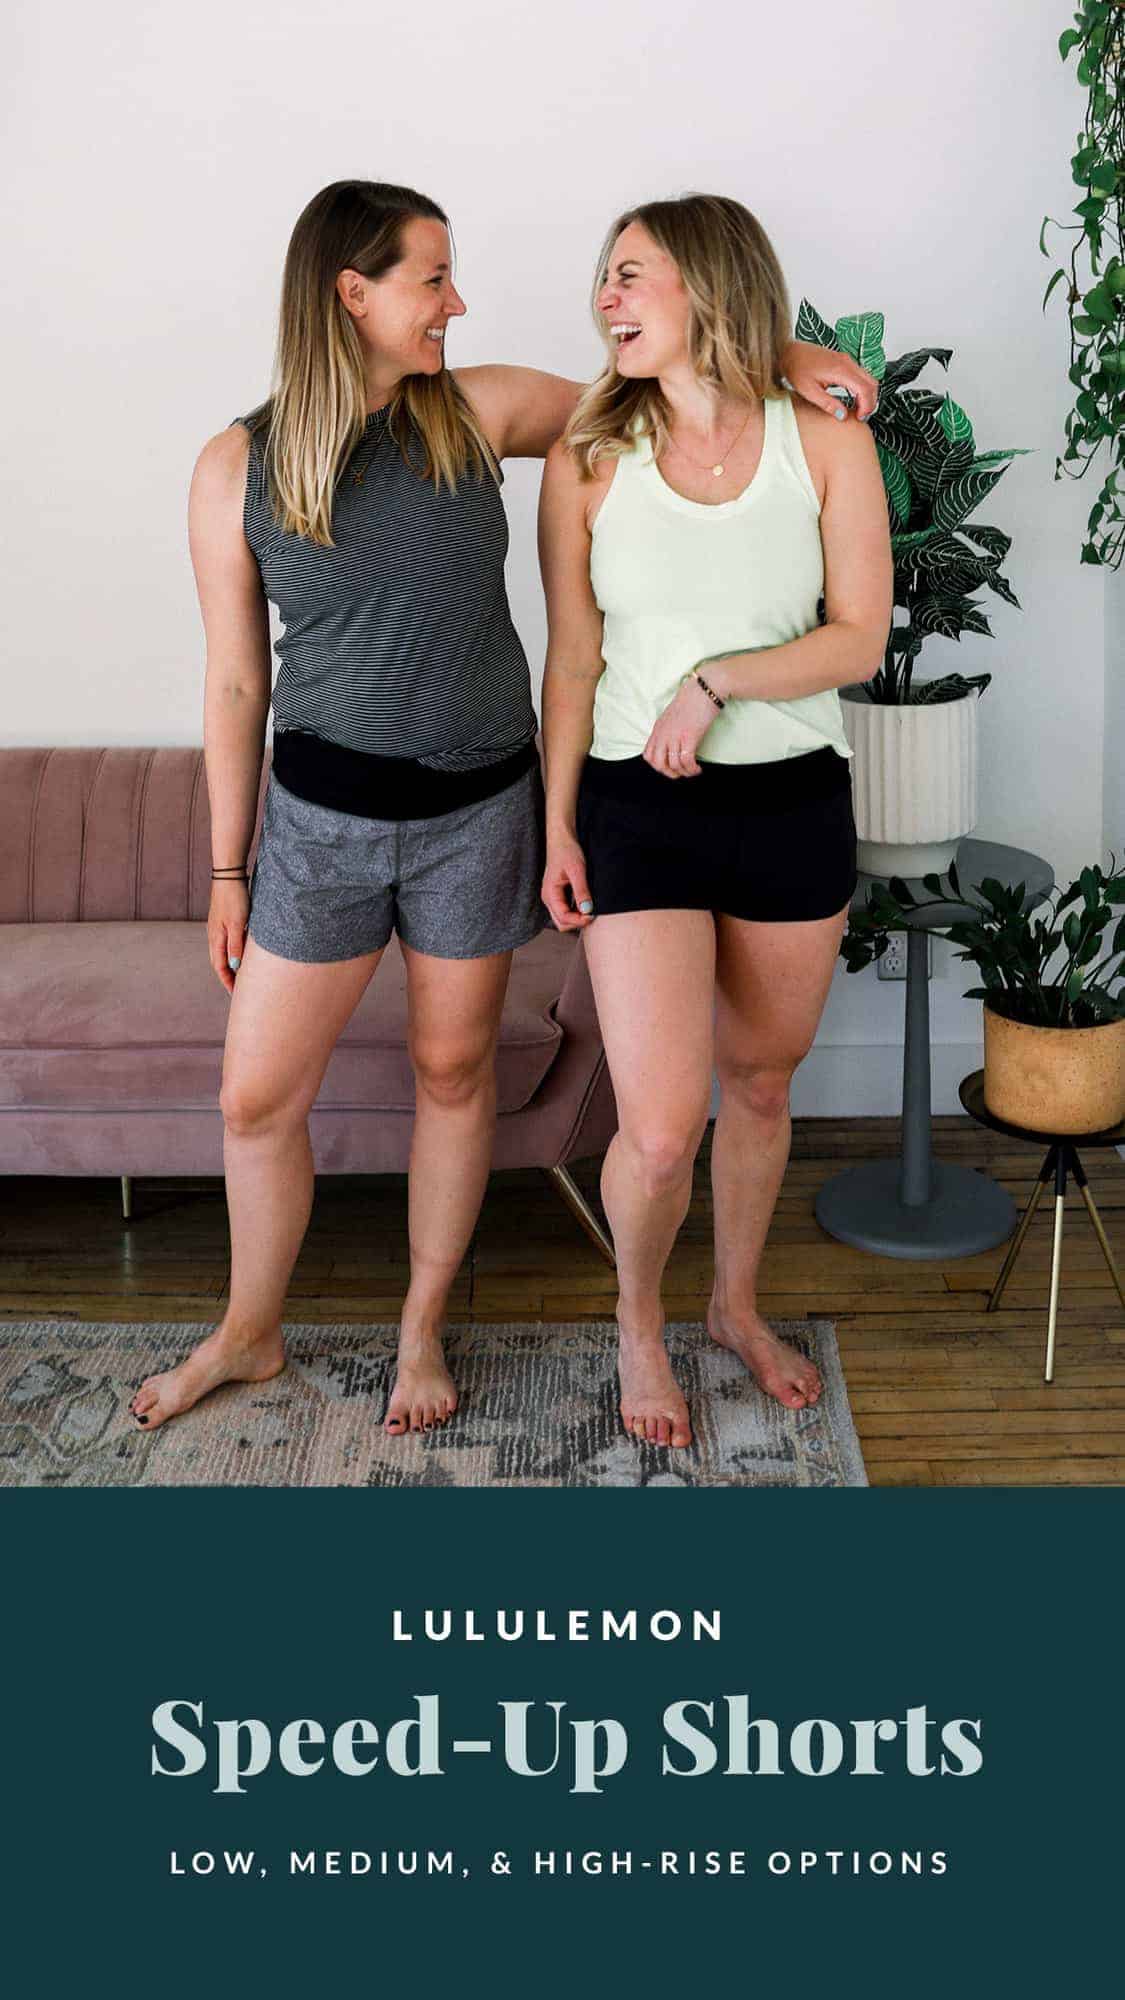 lee and emily wearing speed up shorts from lululemon